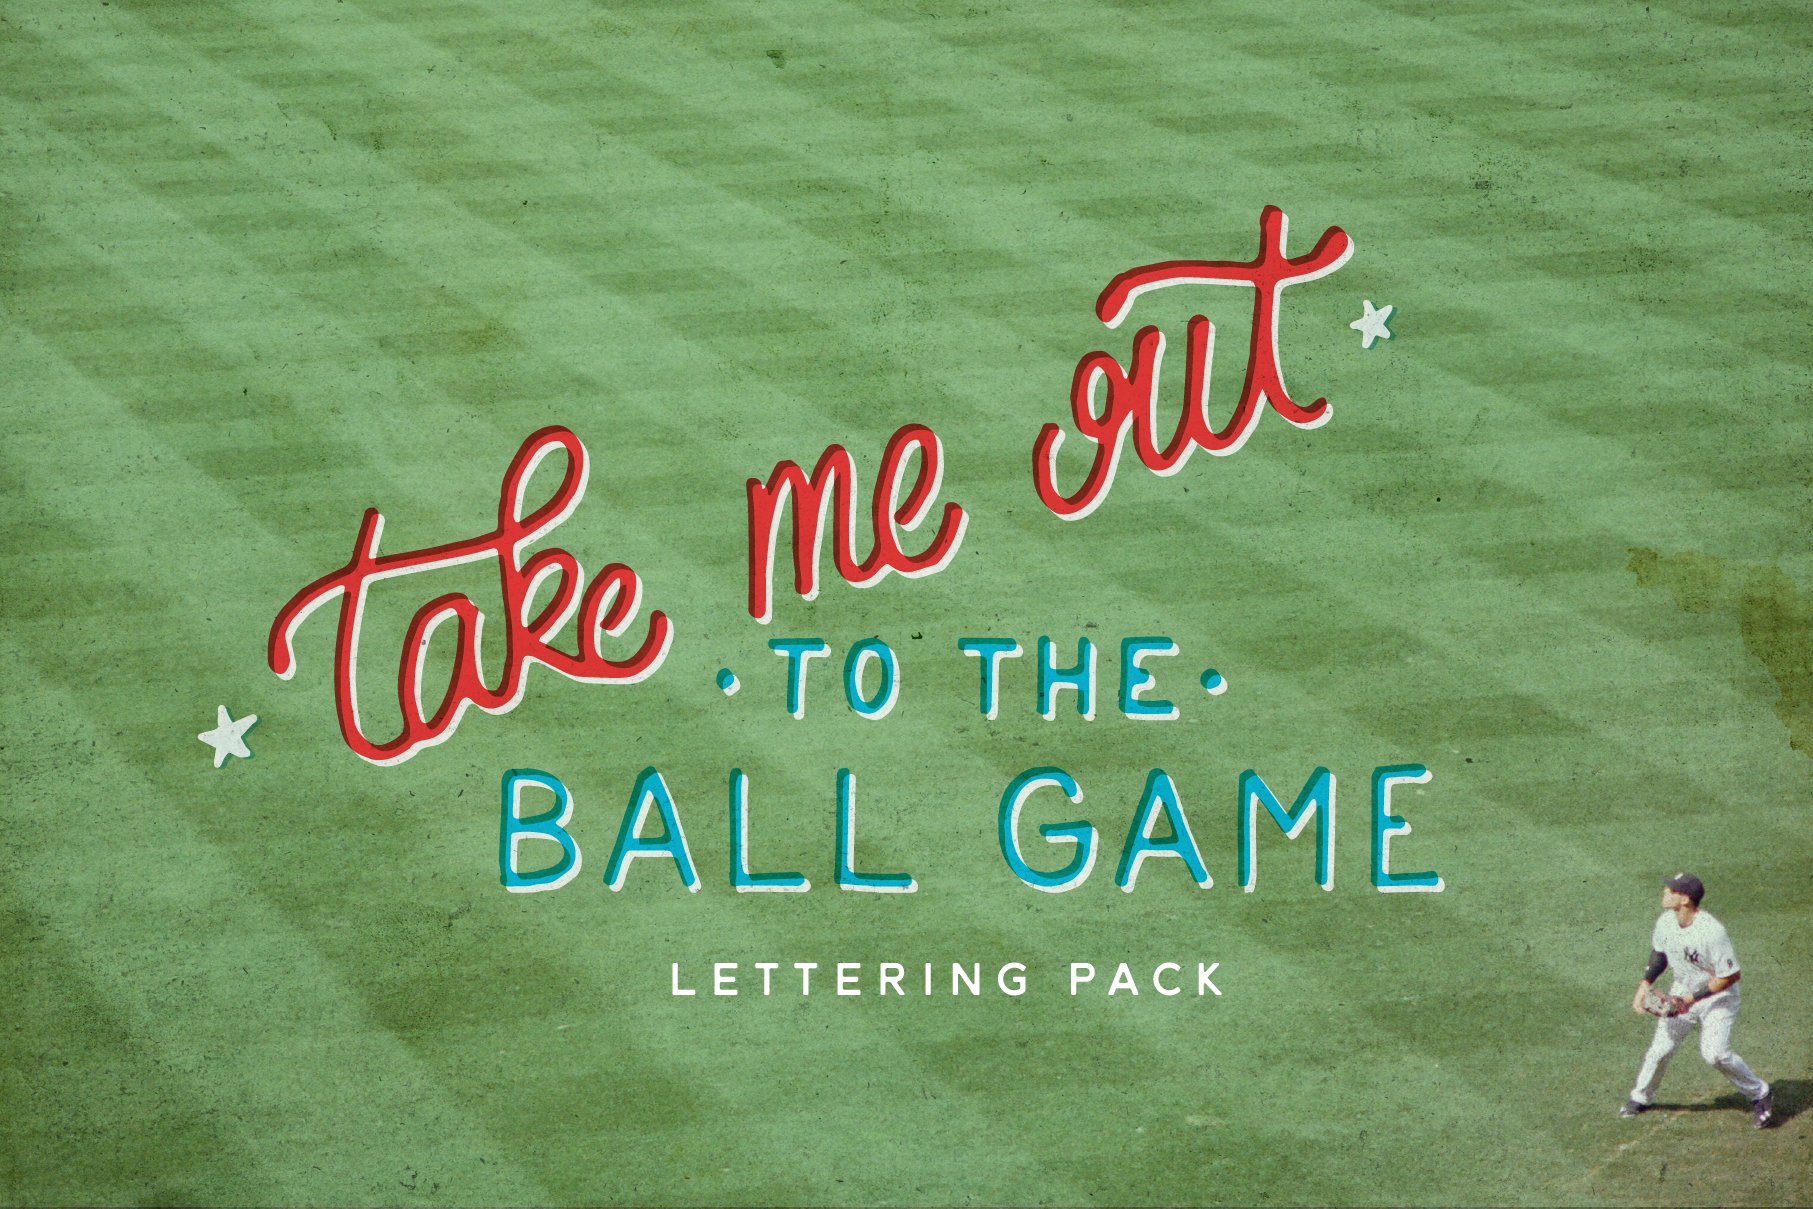 Take Me Out to the Ball Game cover image.